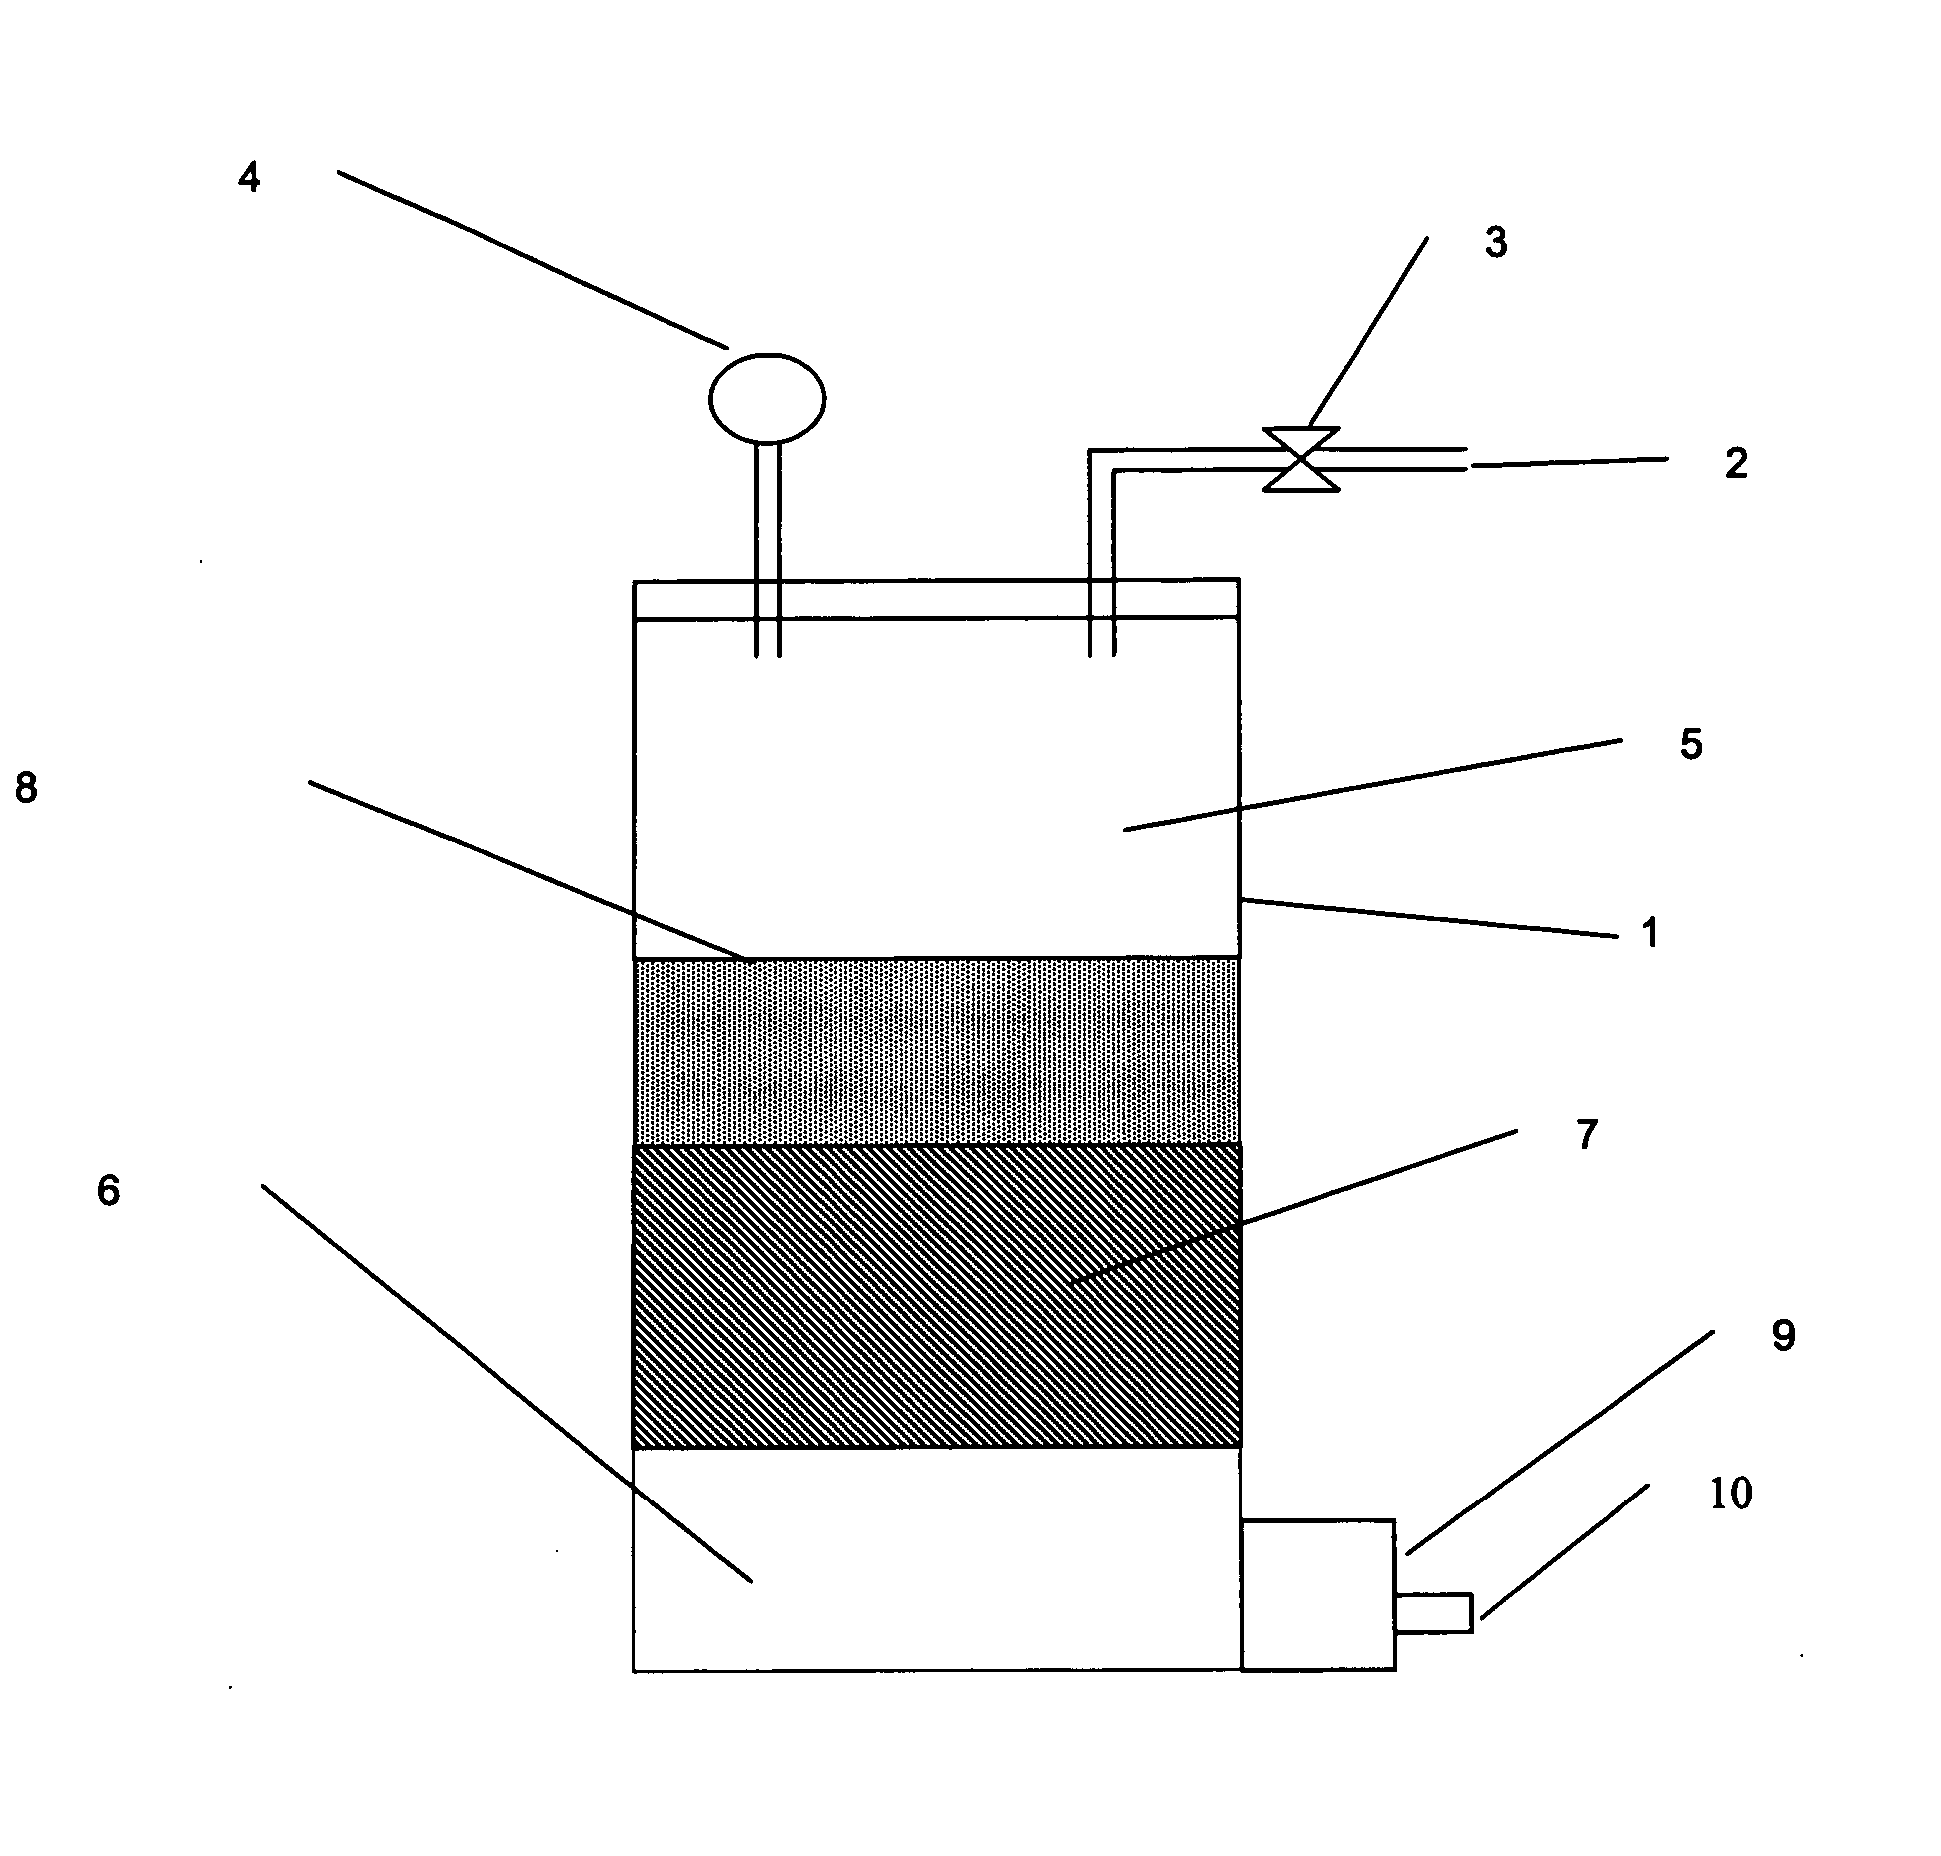 Process for improved adhesive application